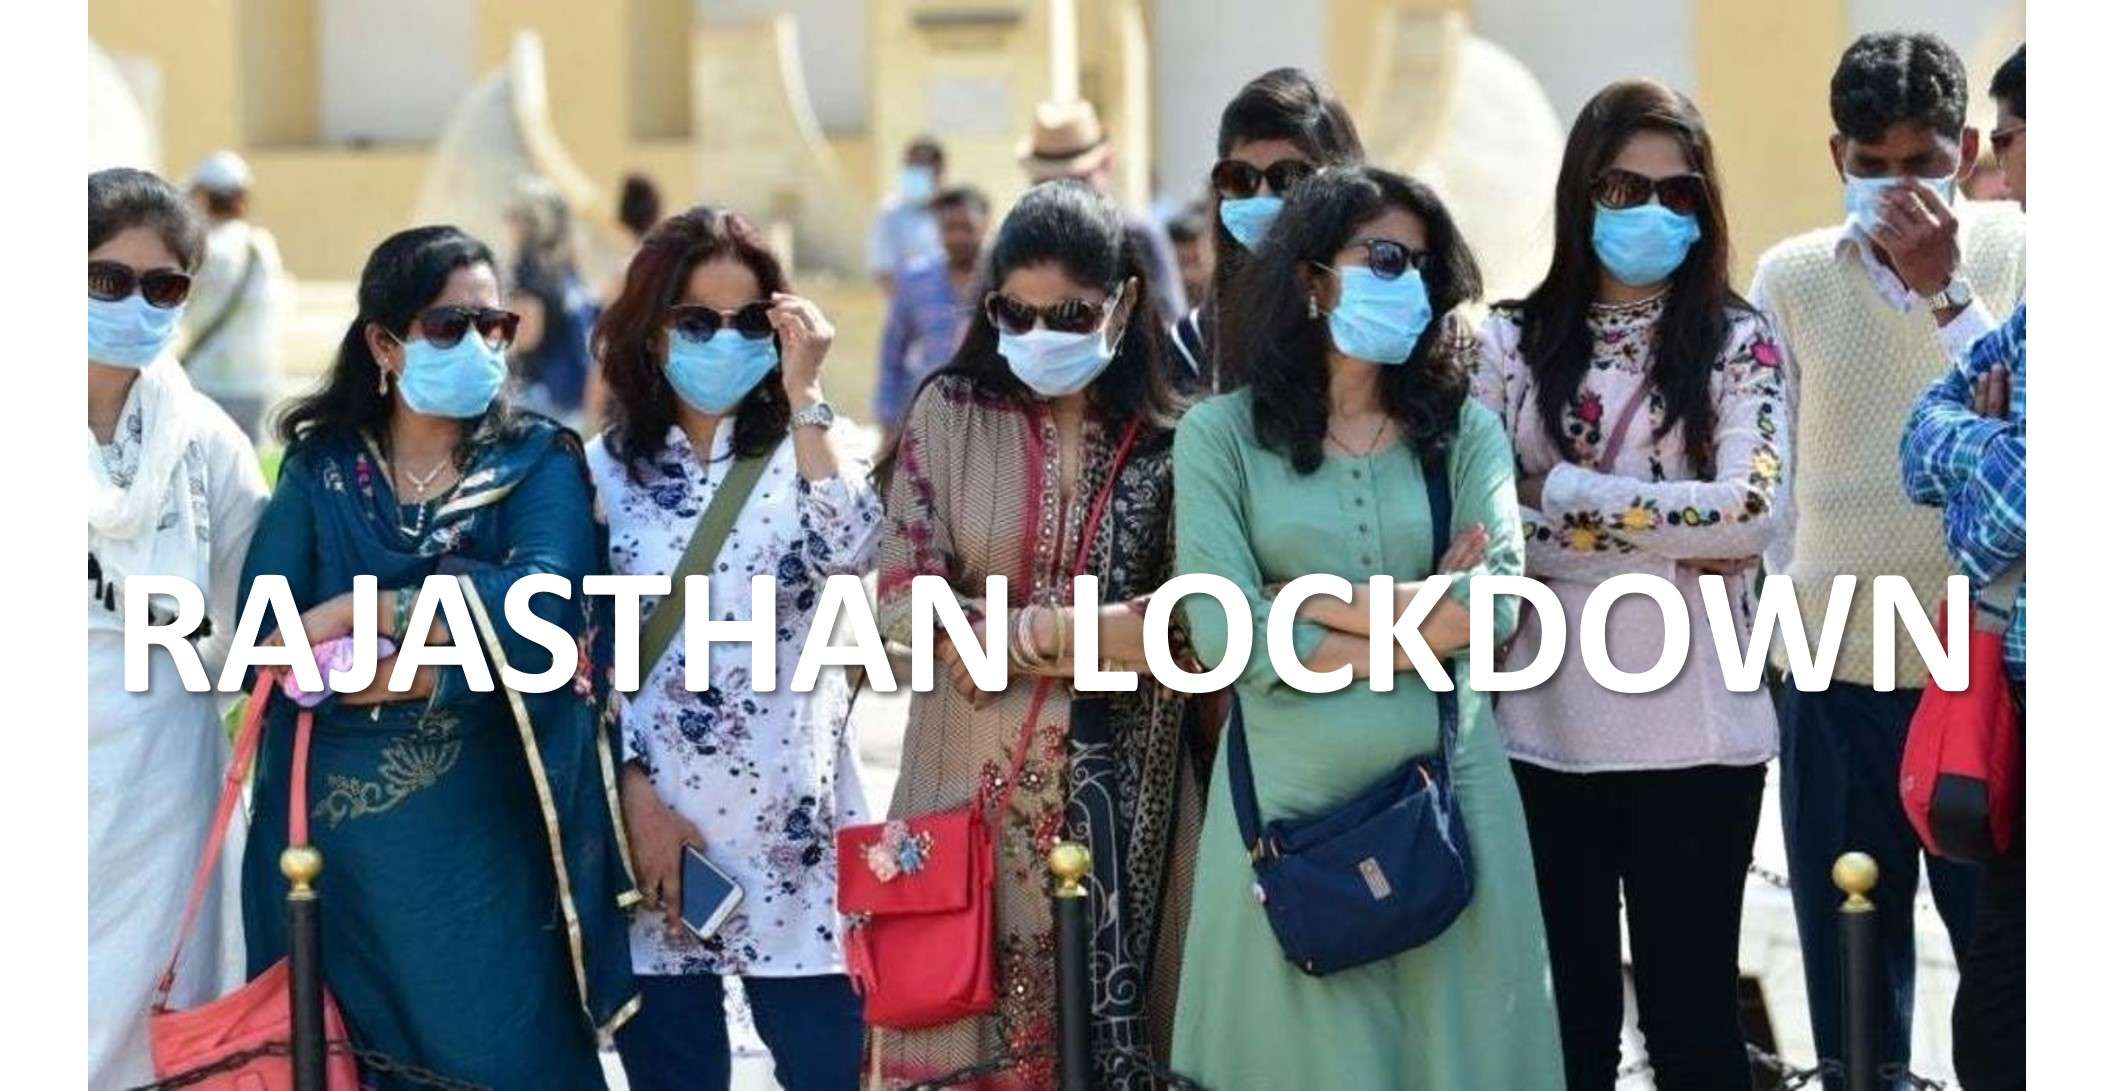 Rajasthan Coronavirus Update | Lockdown in Rajasthan till 31 March - Chief Minister tightens the knob